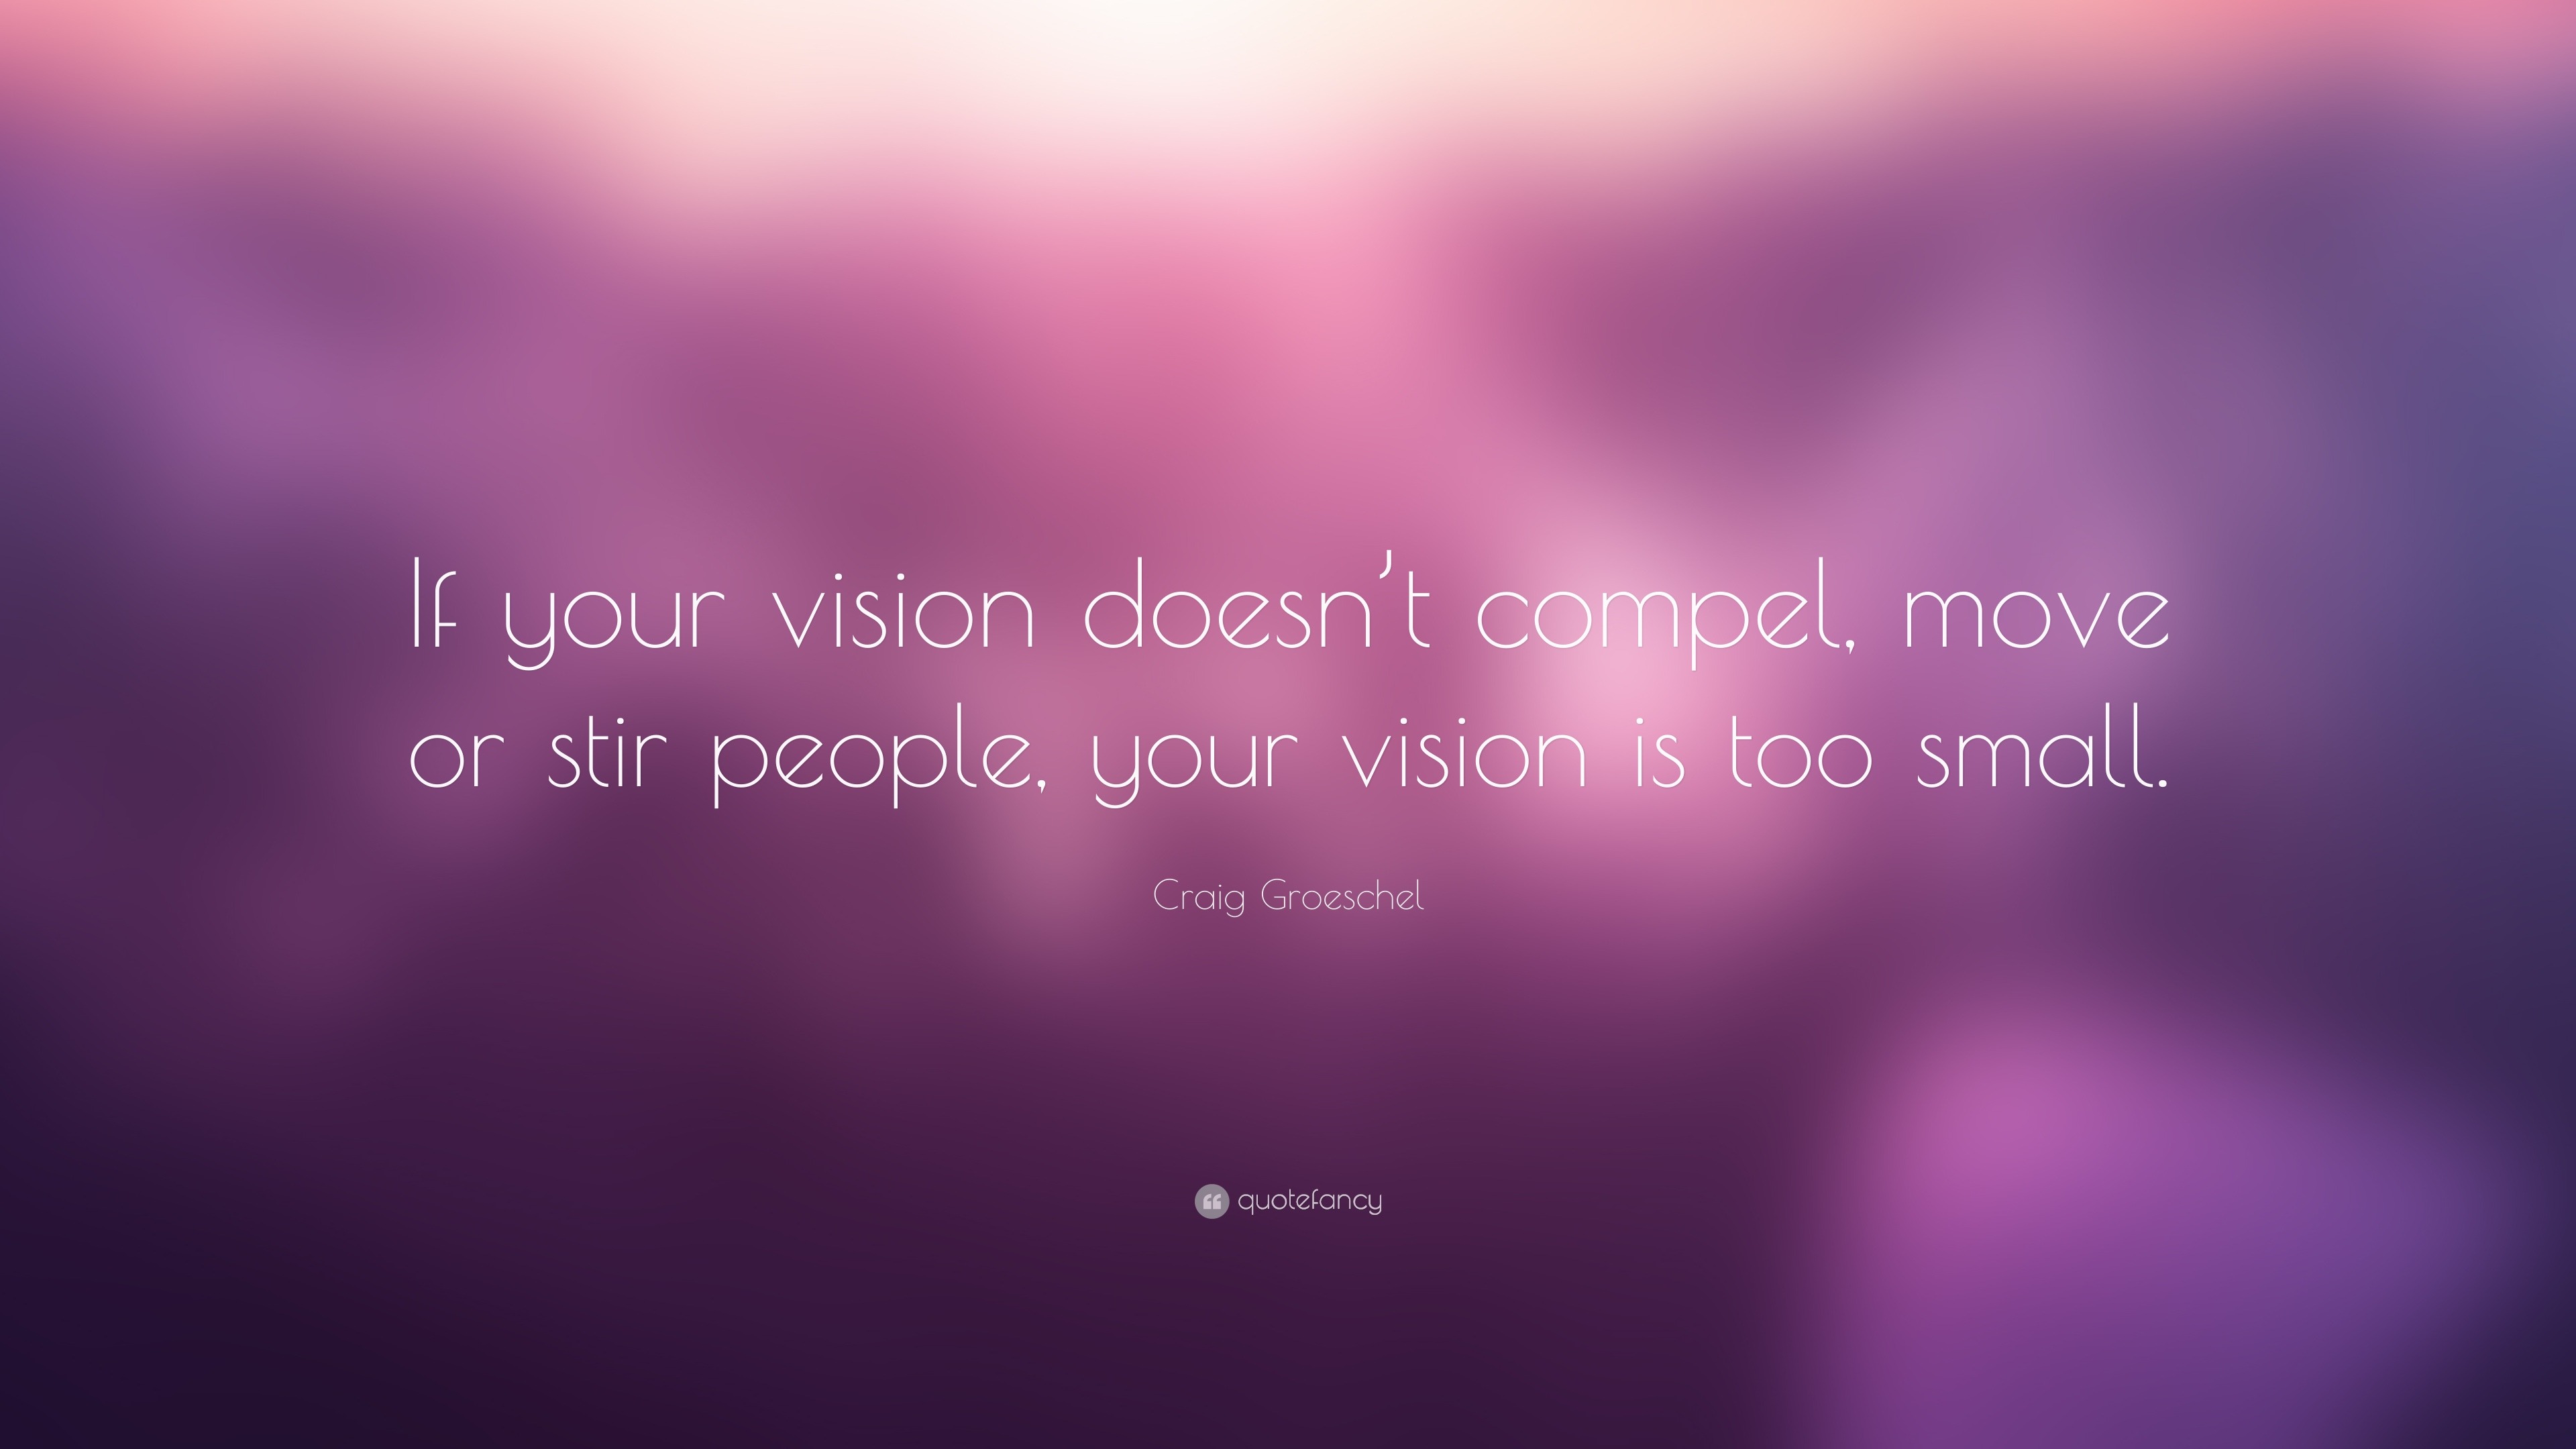 Craig Groeschel Quote: “If your vision doesn’t compel, move or stir ...